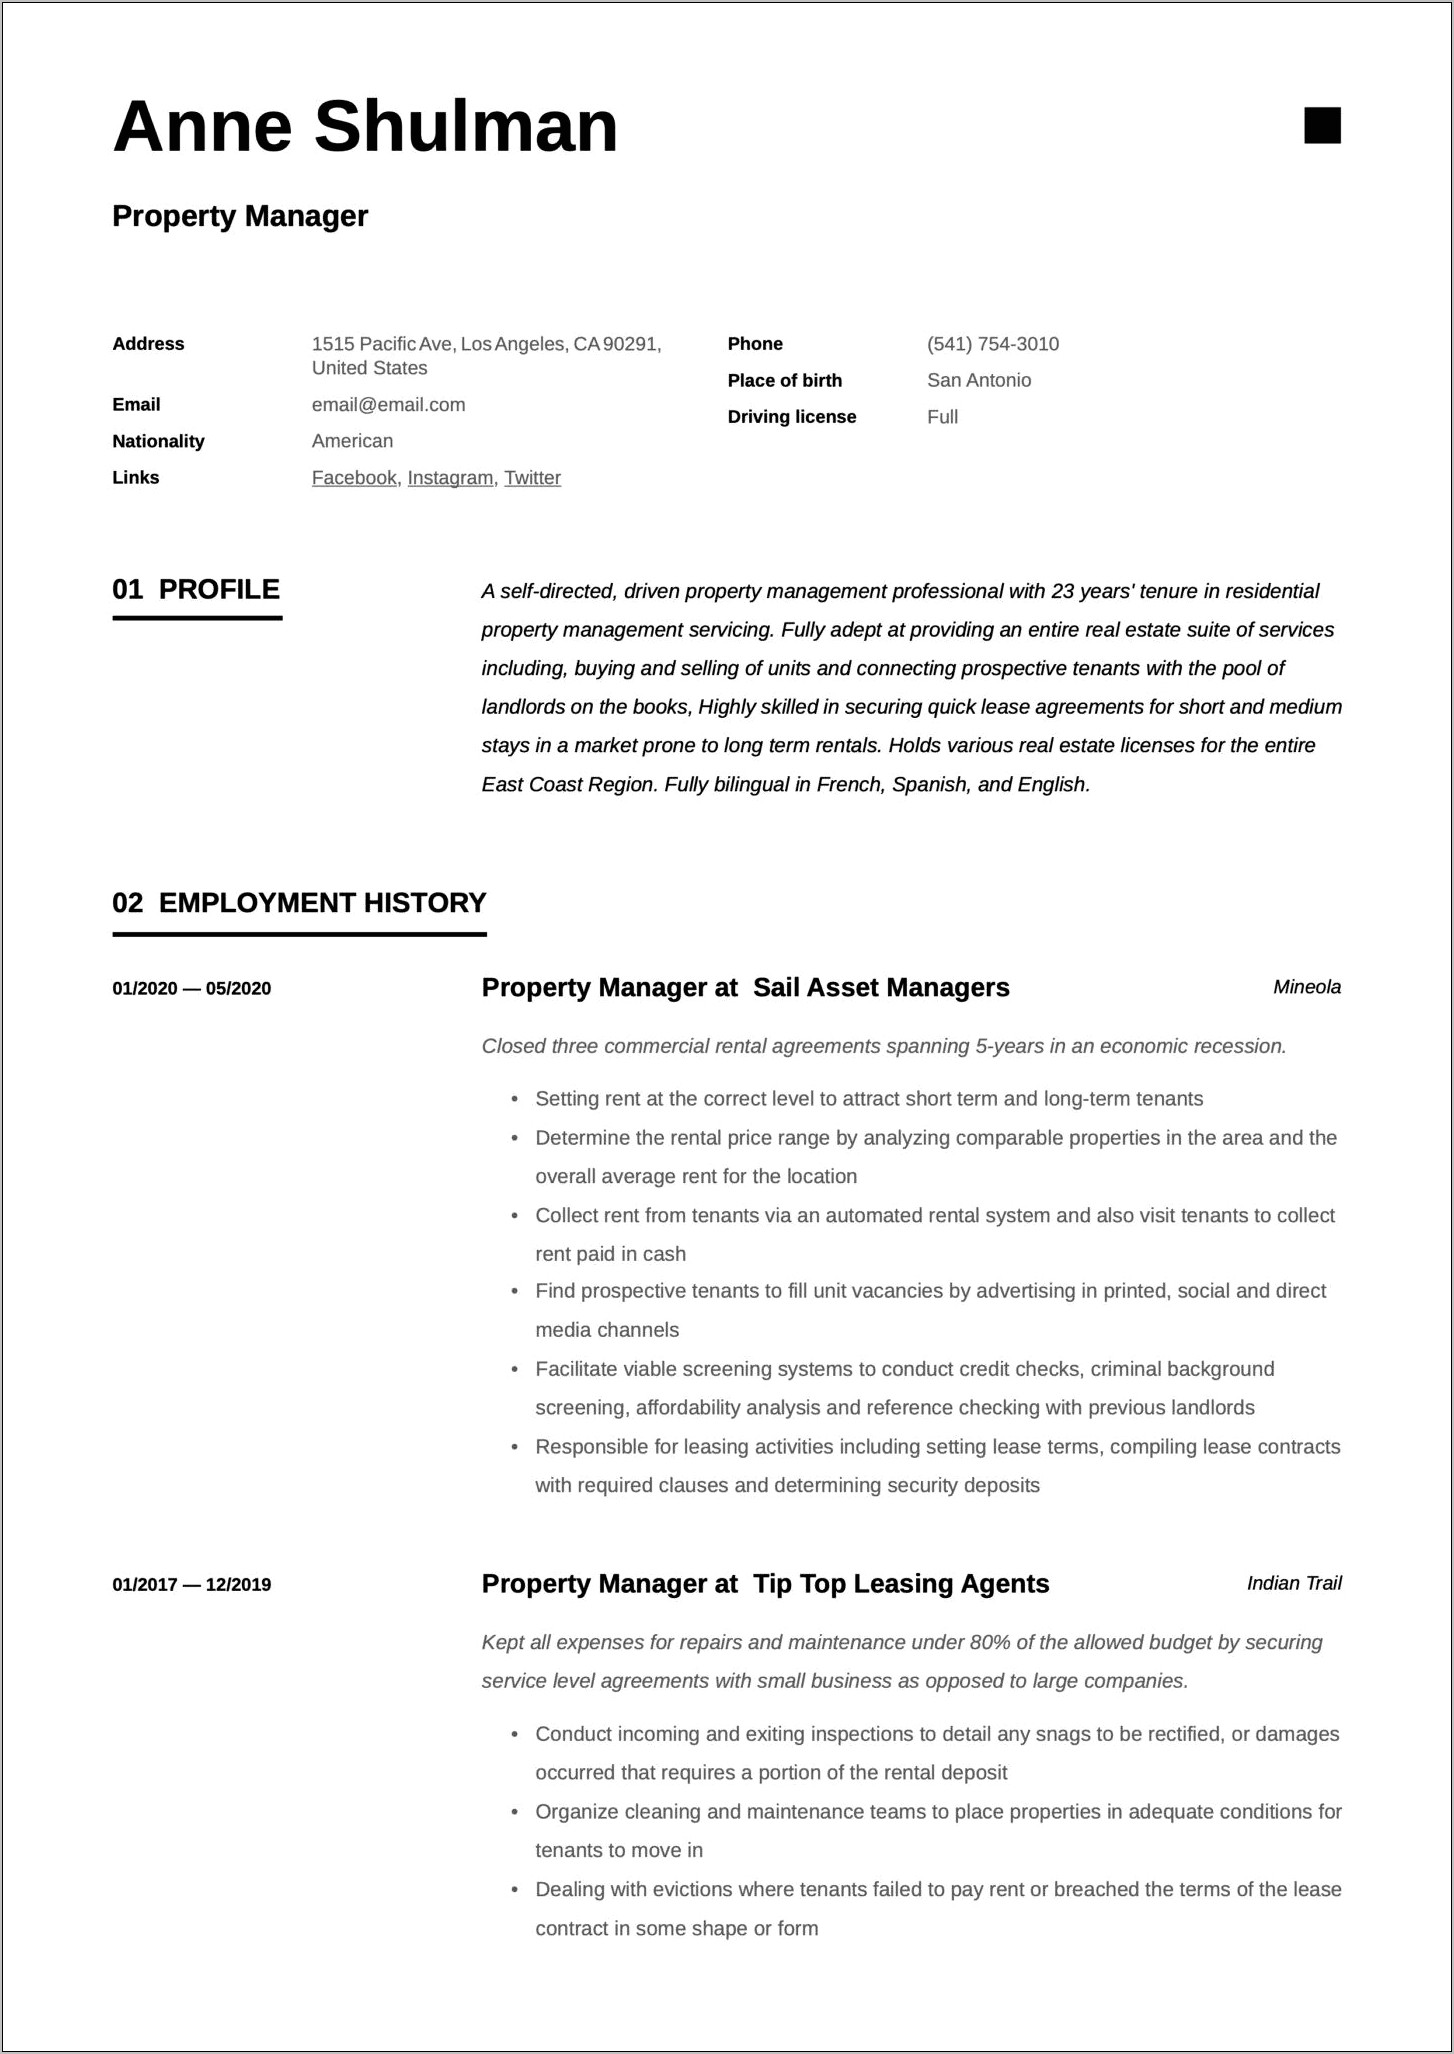 Resumes Of Qualified Property Managers